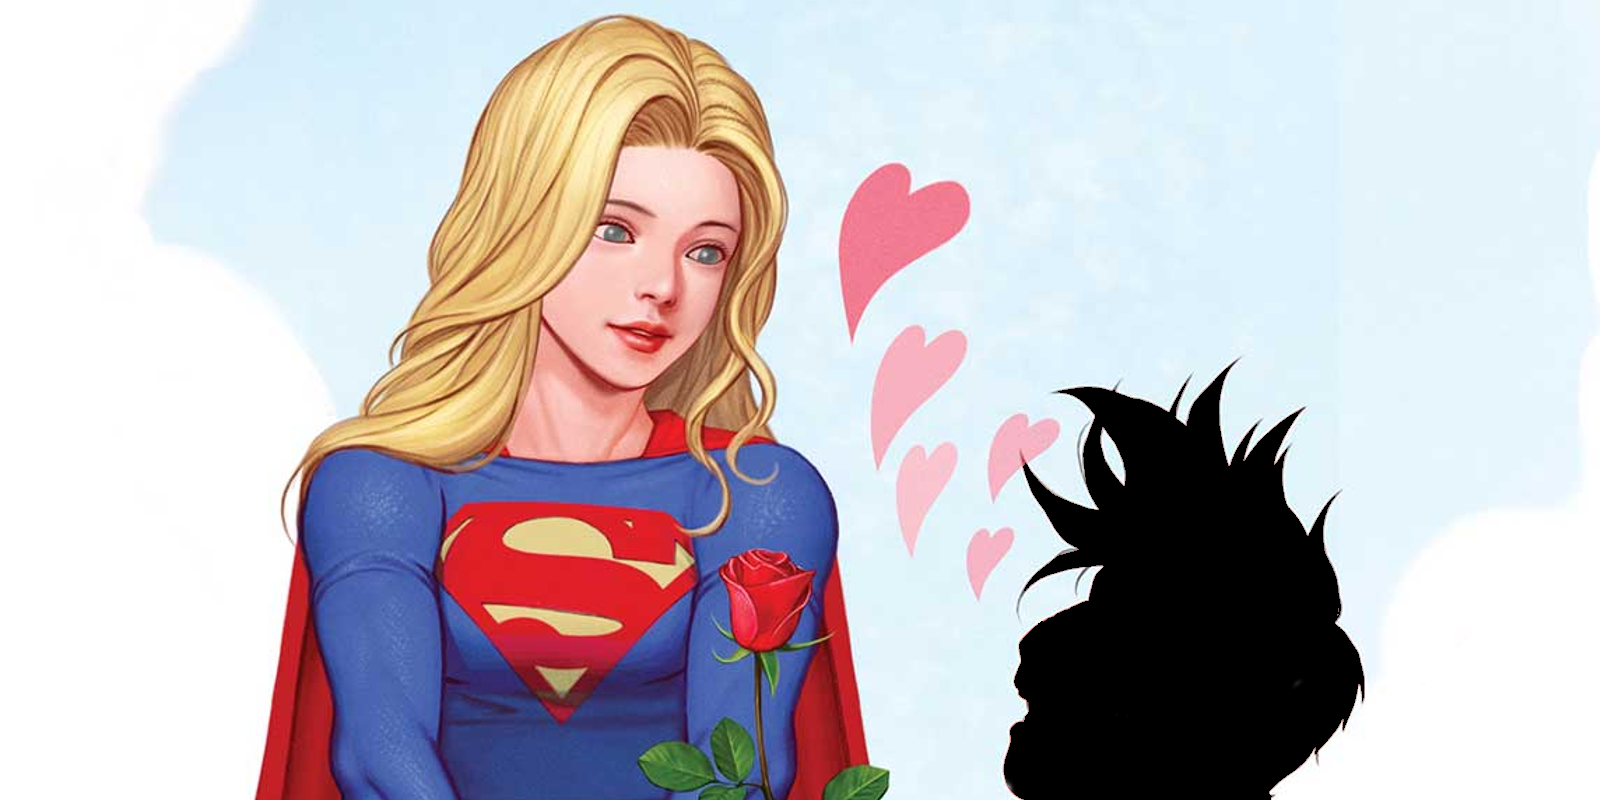 One of DC's Newest Superheroes Has an Obvious Crush on Supergirl